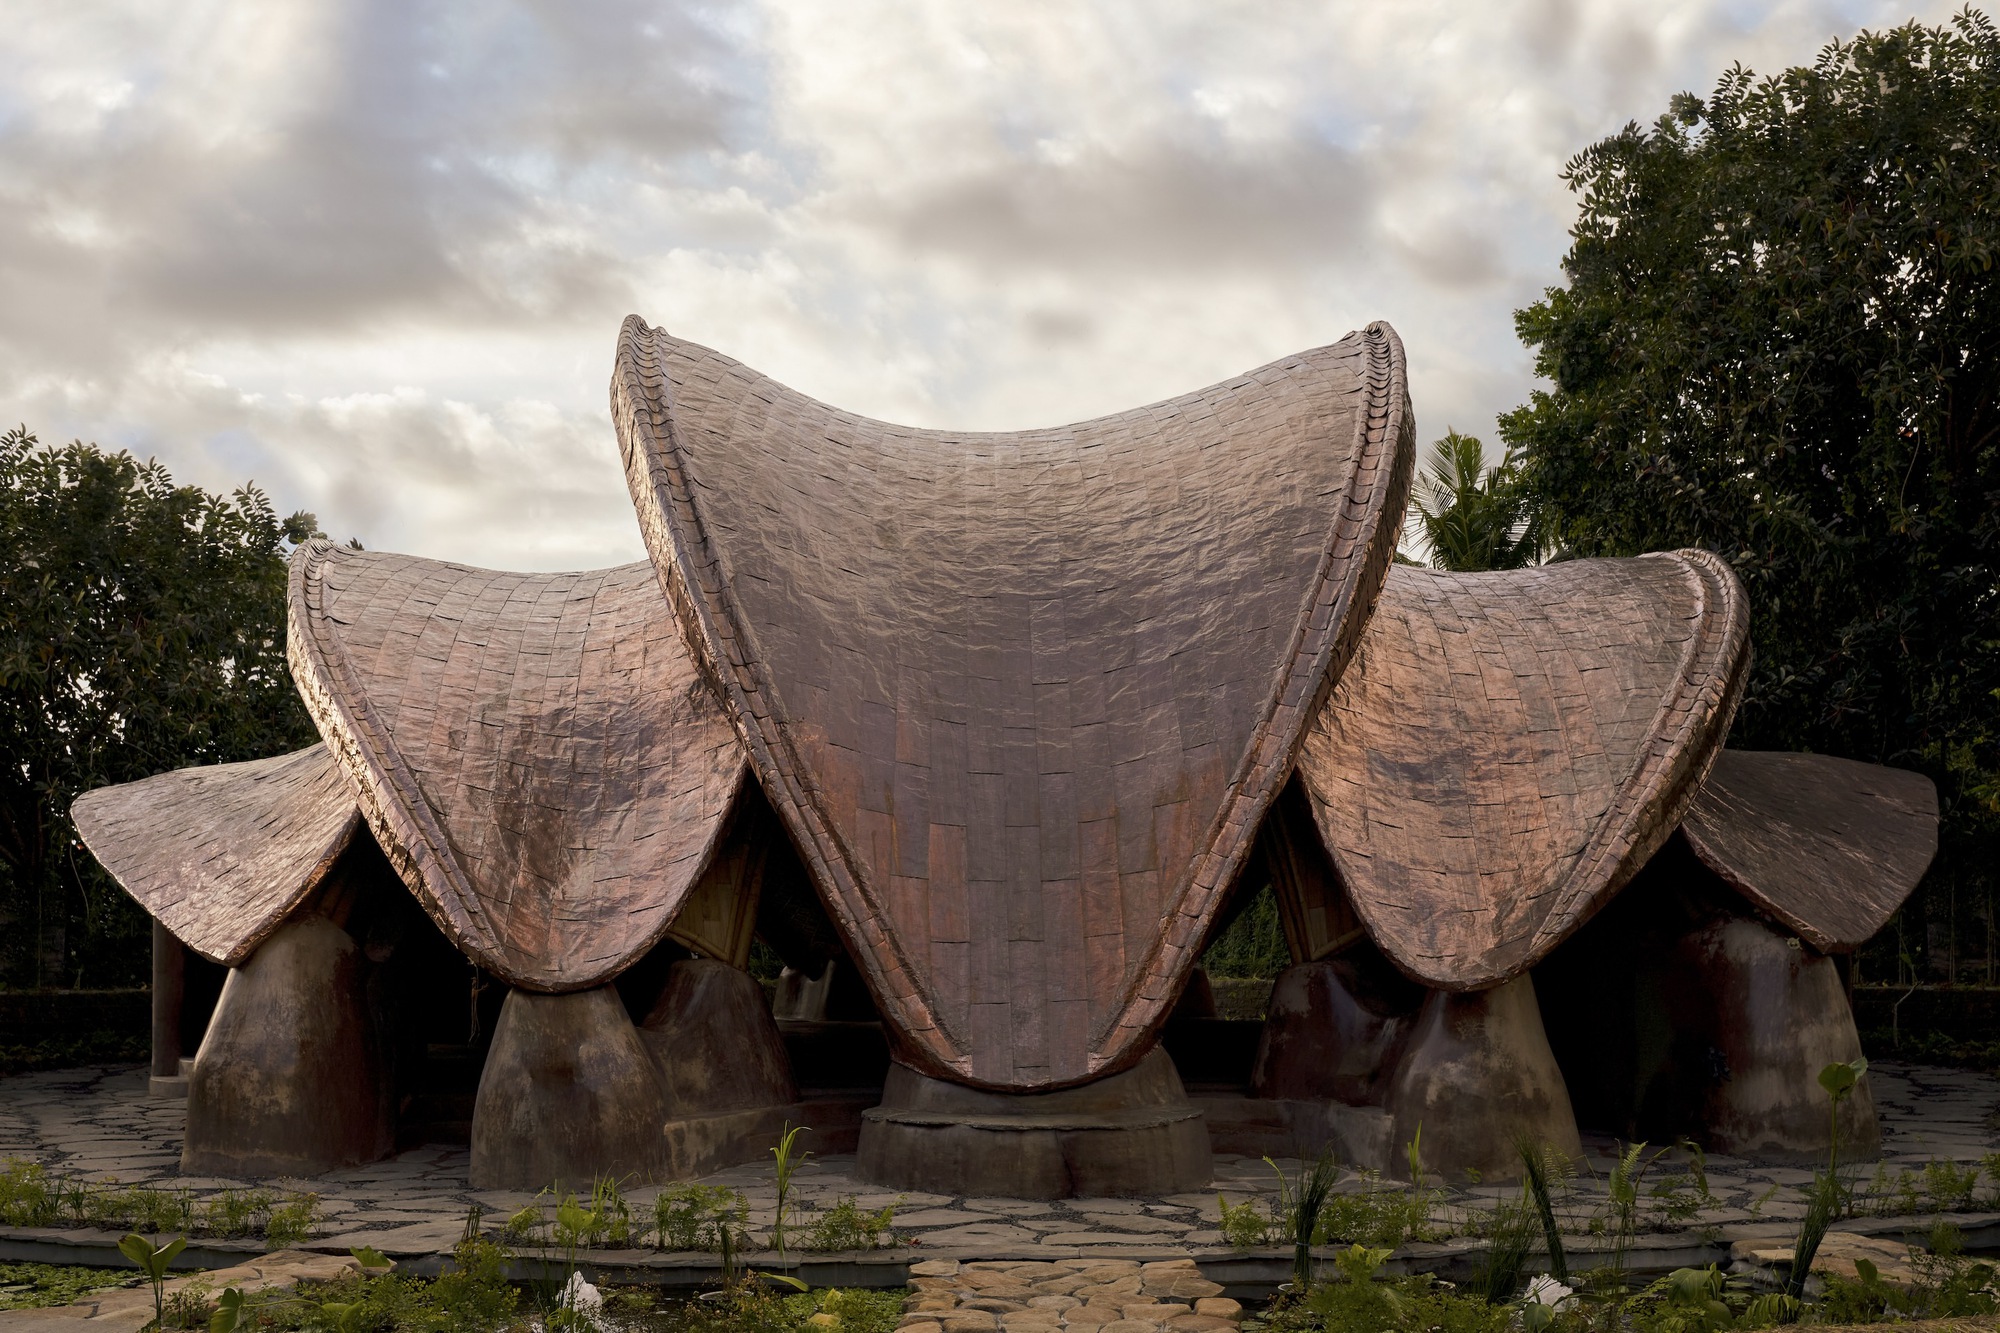 Lumi Shala, a Magnificent Bamboo Structure Offering Wellness